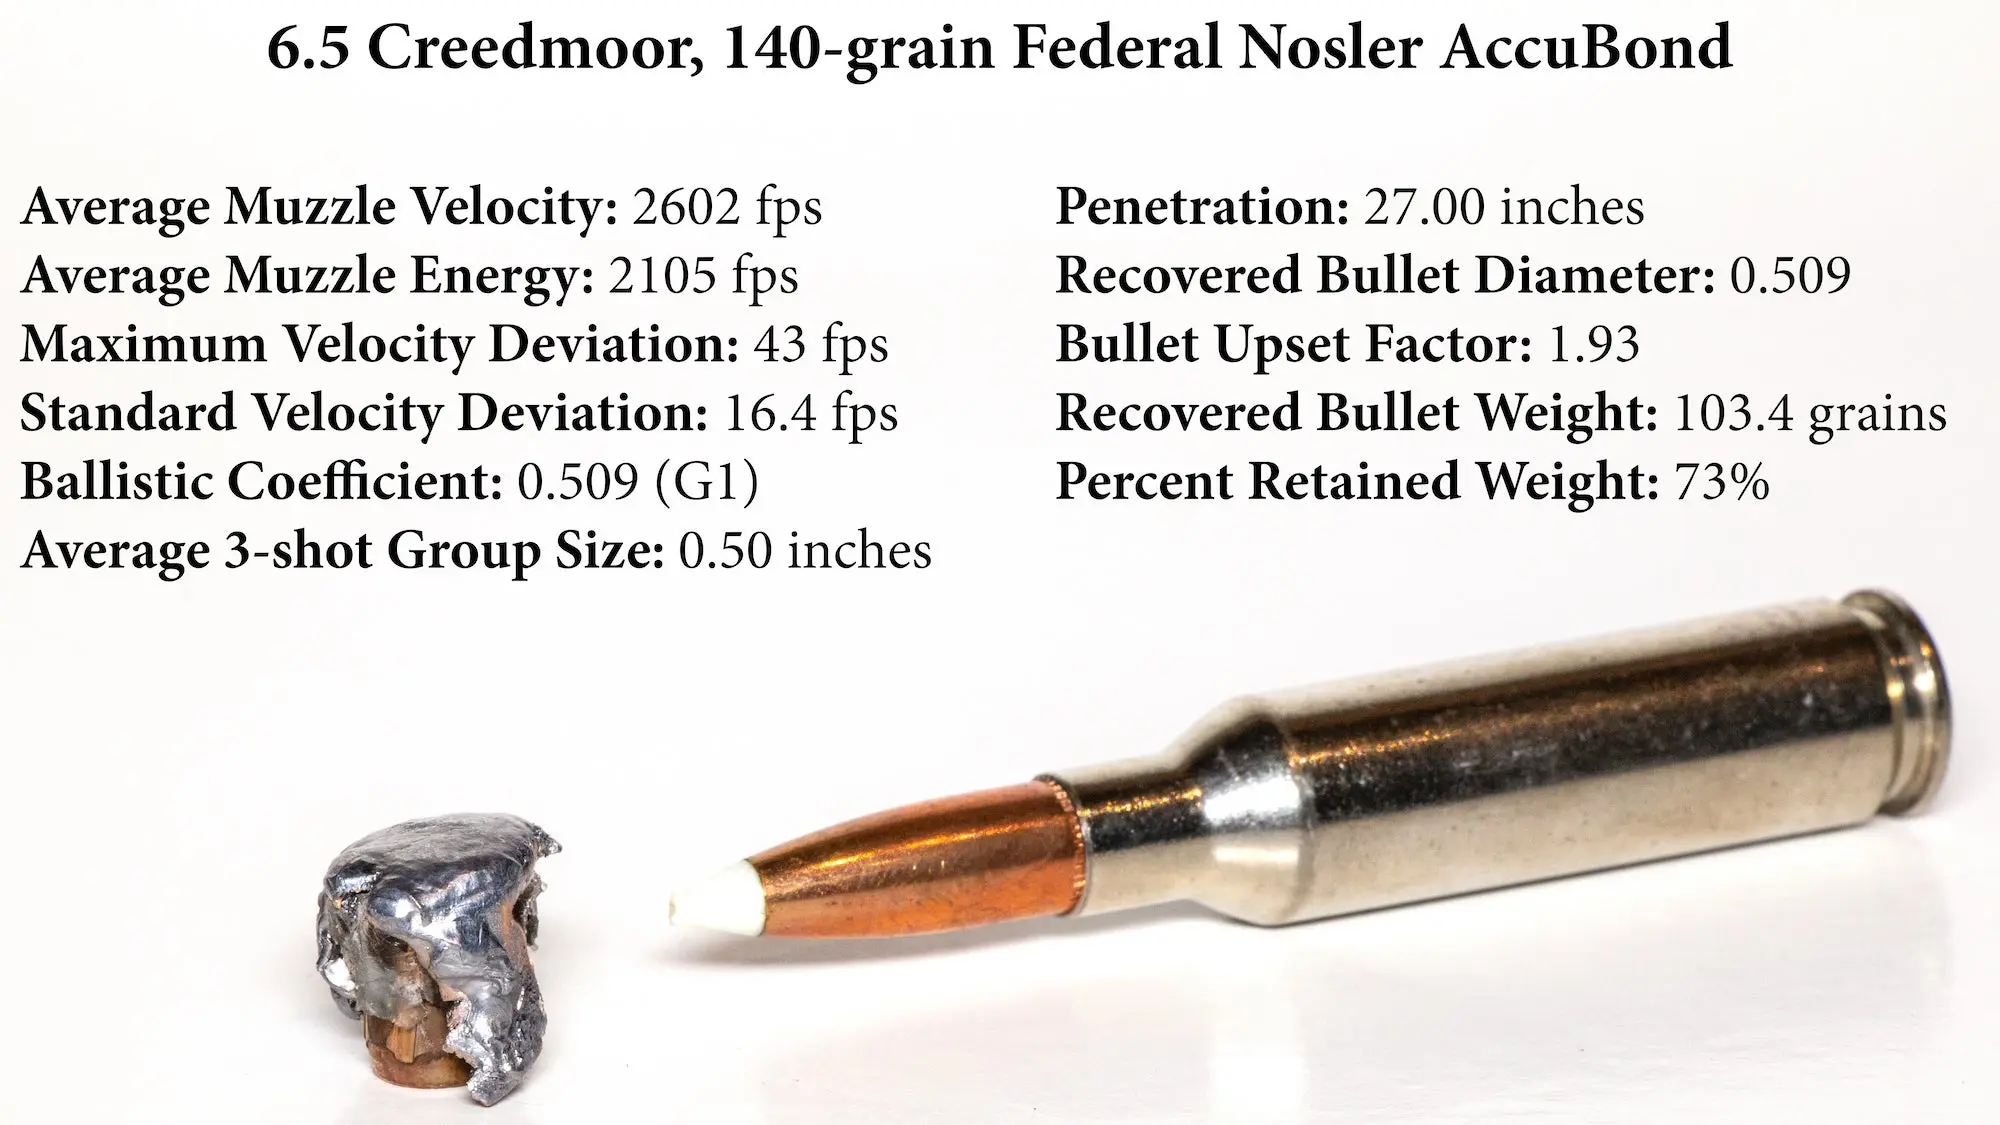 Chart showing the test results for the Federal 140-grain Nosler AccuBond 6.5 Creedmoor load.